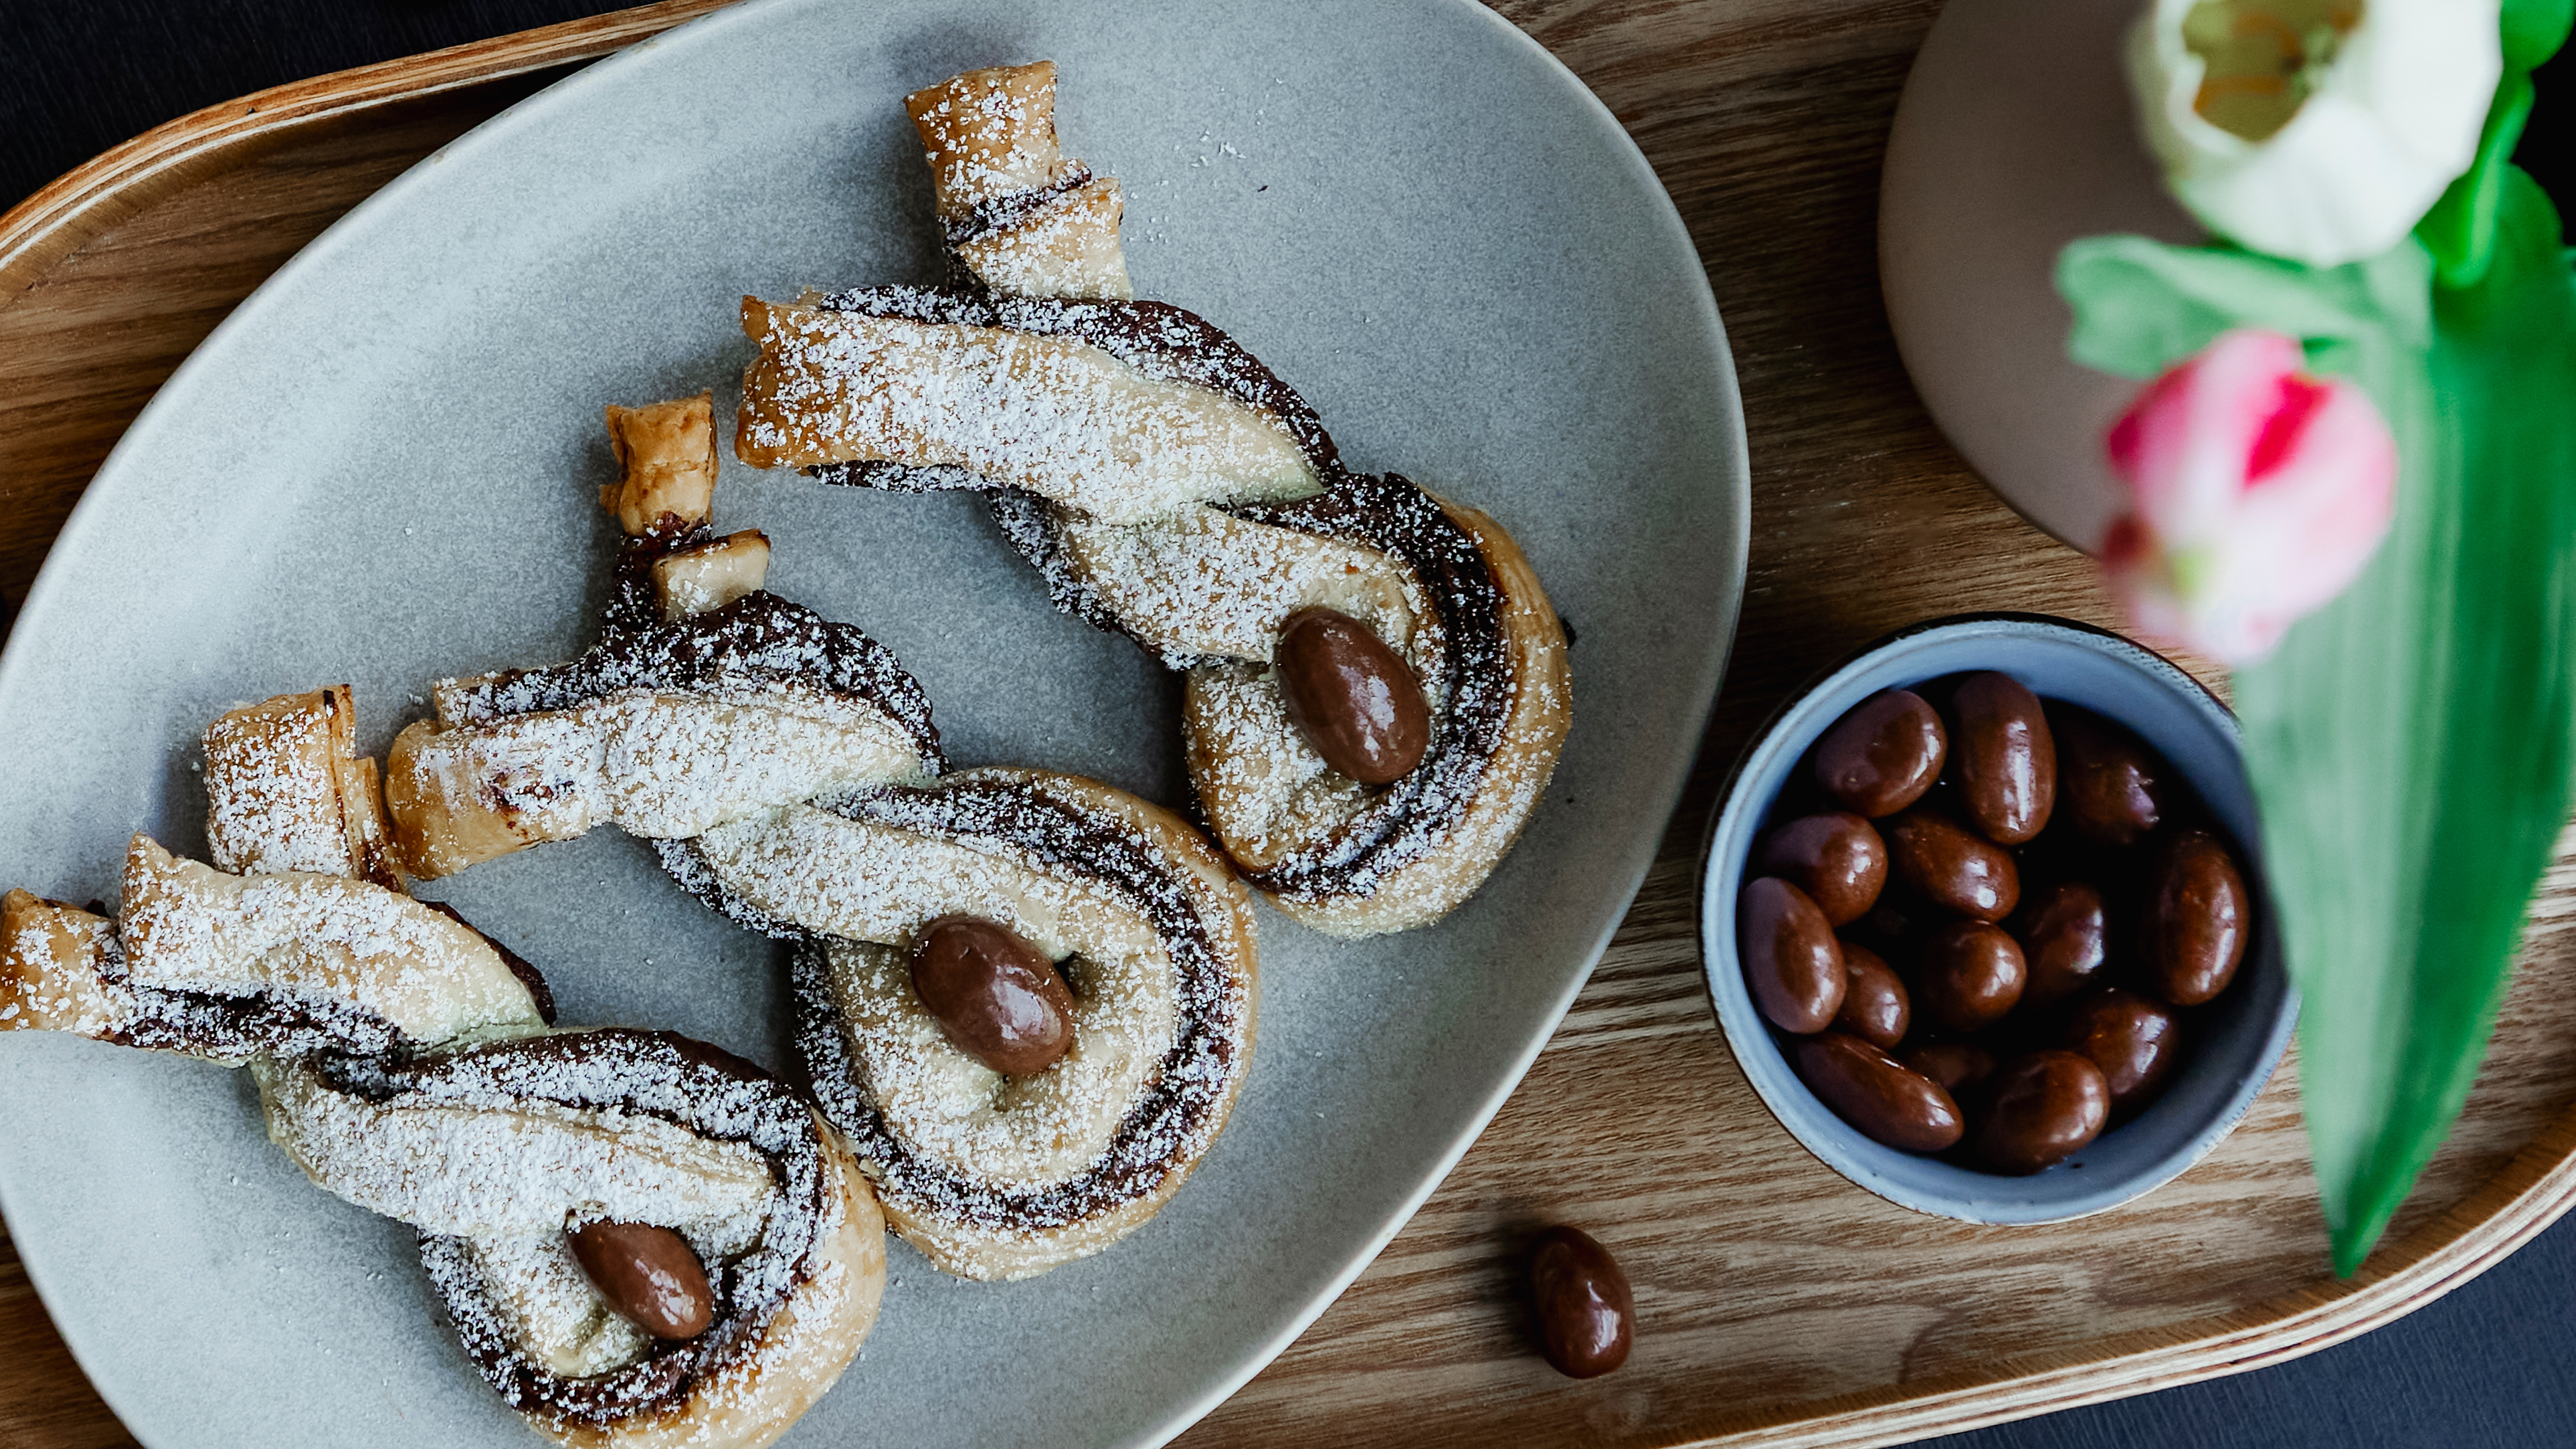 Discover the easy recipe for Chocolate Puff Pastry Bunnies – the perfect baking idea for Easter. Ideal for beginners and experienced bakers. Step-by-step instructions for delicious Easter bunnies.